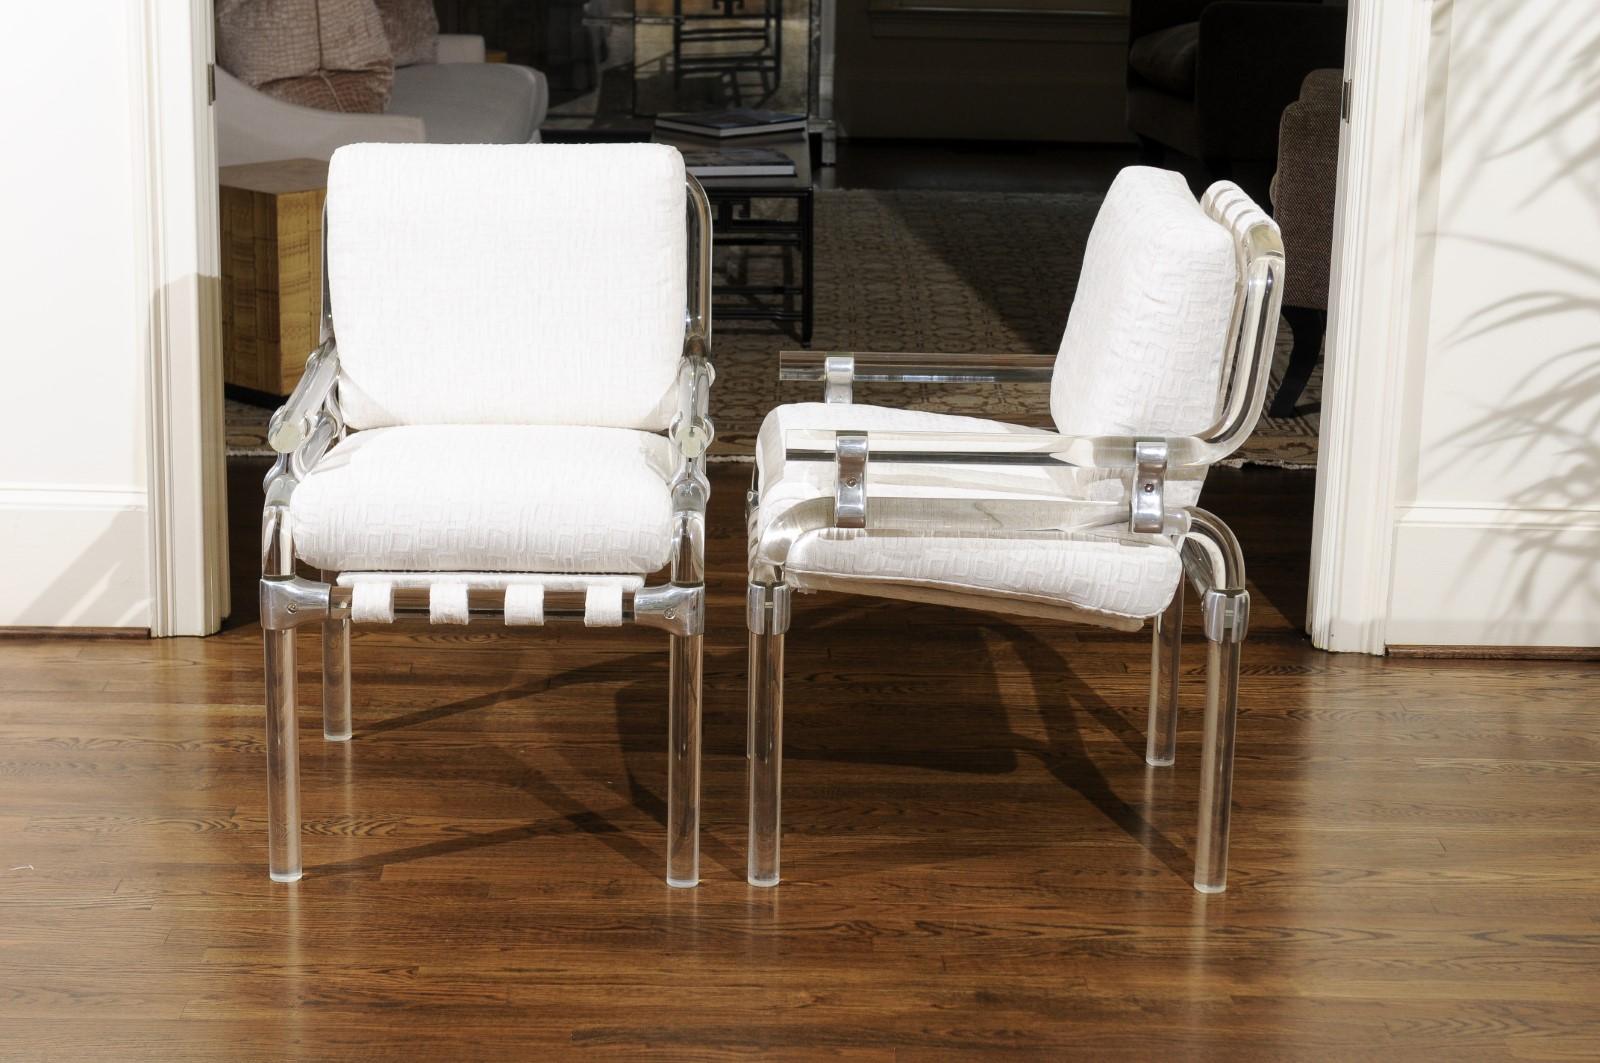 Staggering Set of 8 Lucite Arm Dining Chairs by Jeff Messerschmidt, 1985 For Sale 4